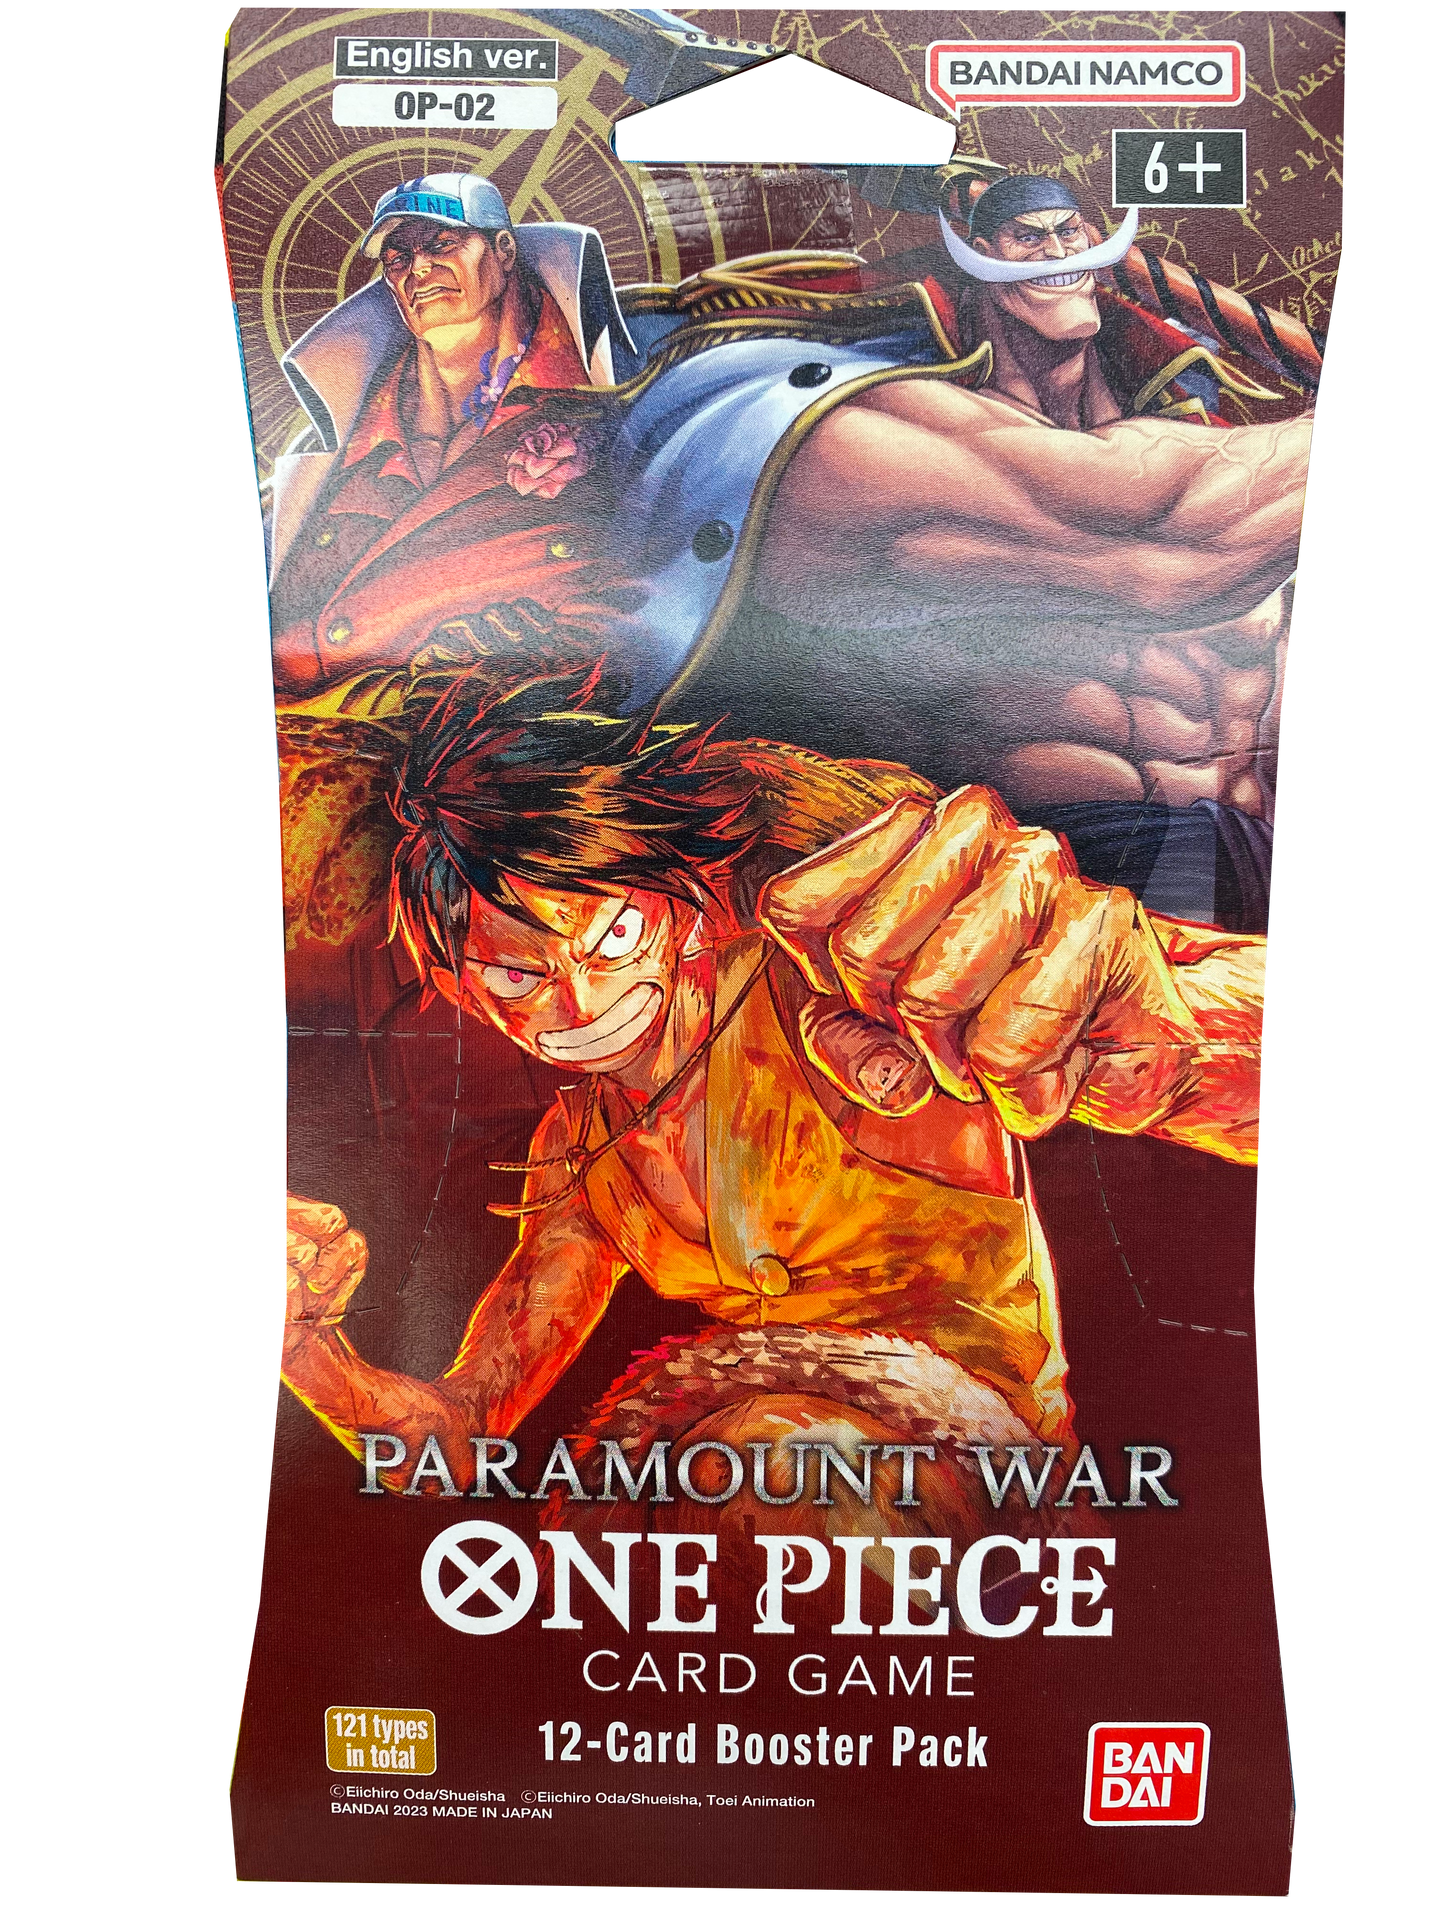 Bandai - One Piece - Paramount War - Sleeved Booster Pack